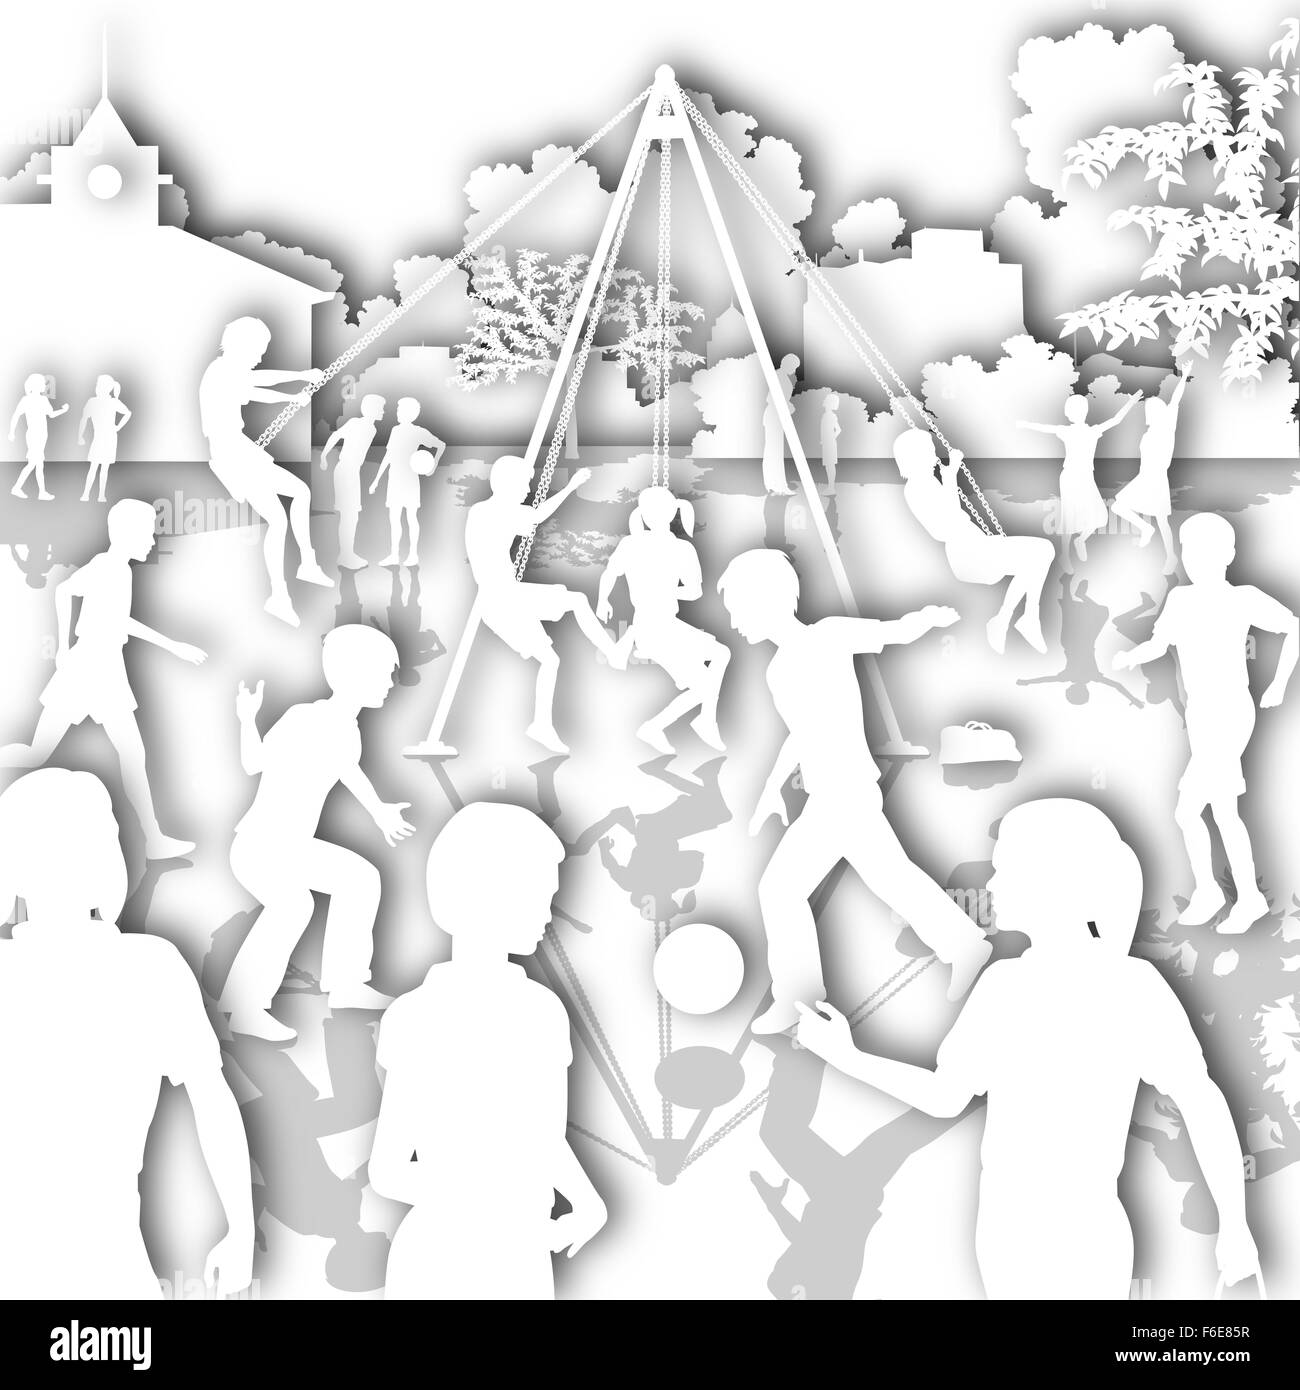 White cutout illustration of children playing in a school playground Stock Photo